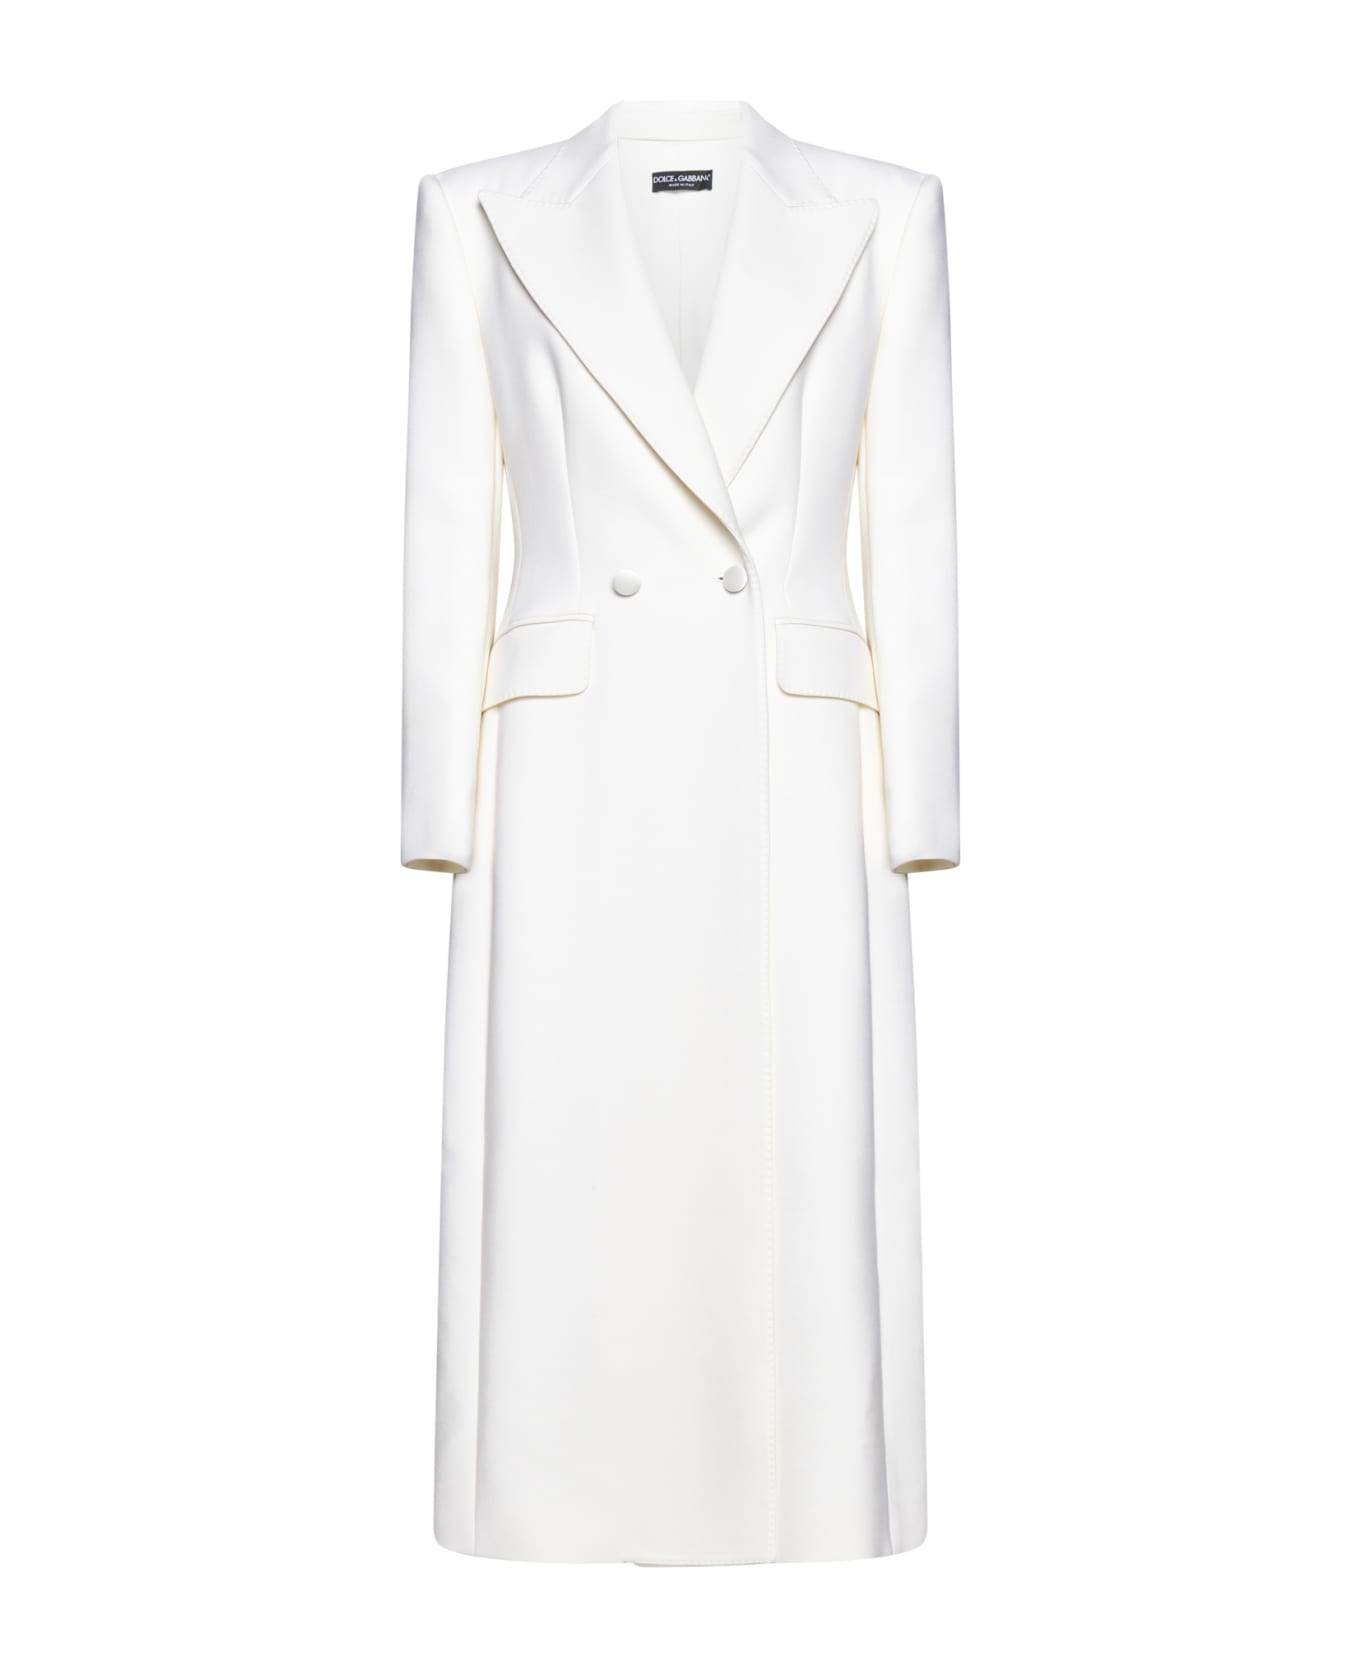 Dolce & Gabbana Double-breasted Coat - Bianco naturale